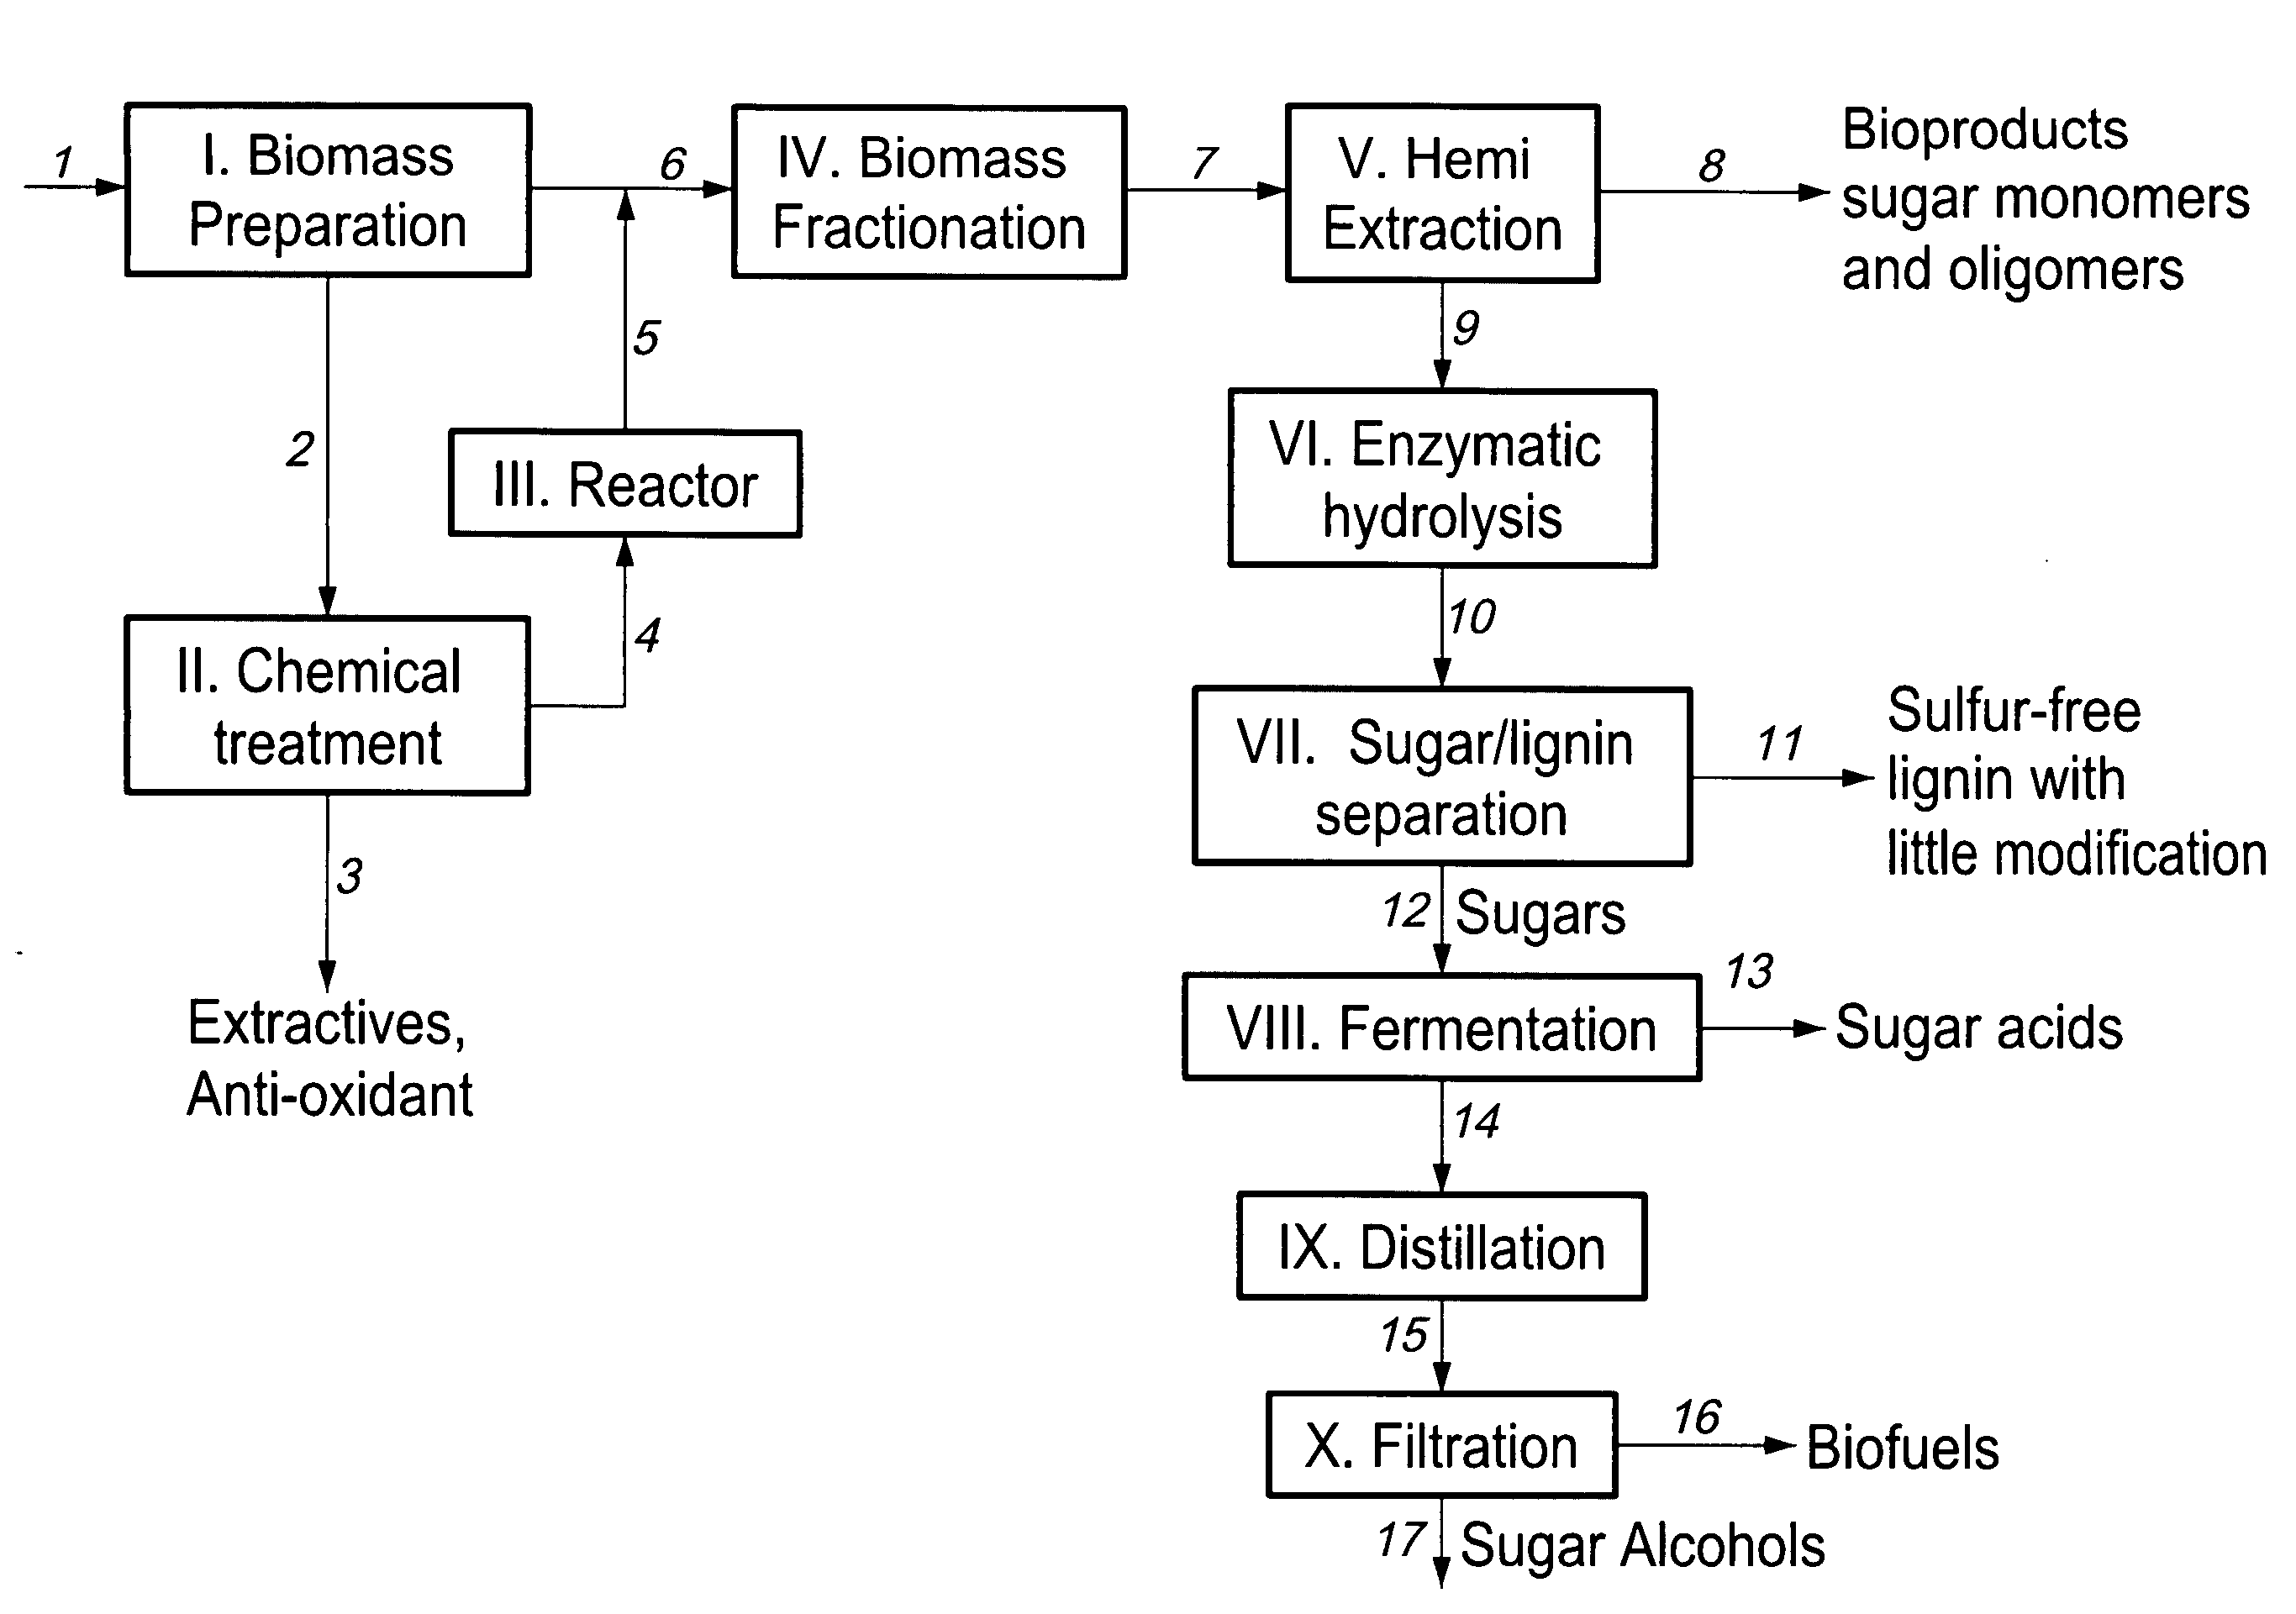 Biomass fractionation process for bioproducts